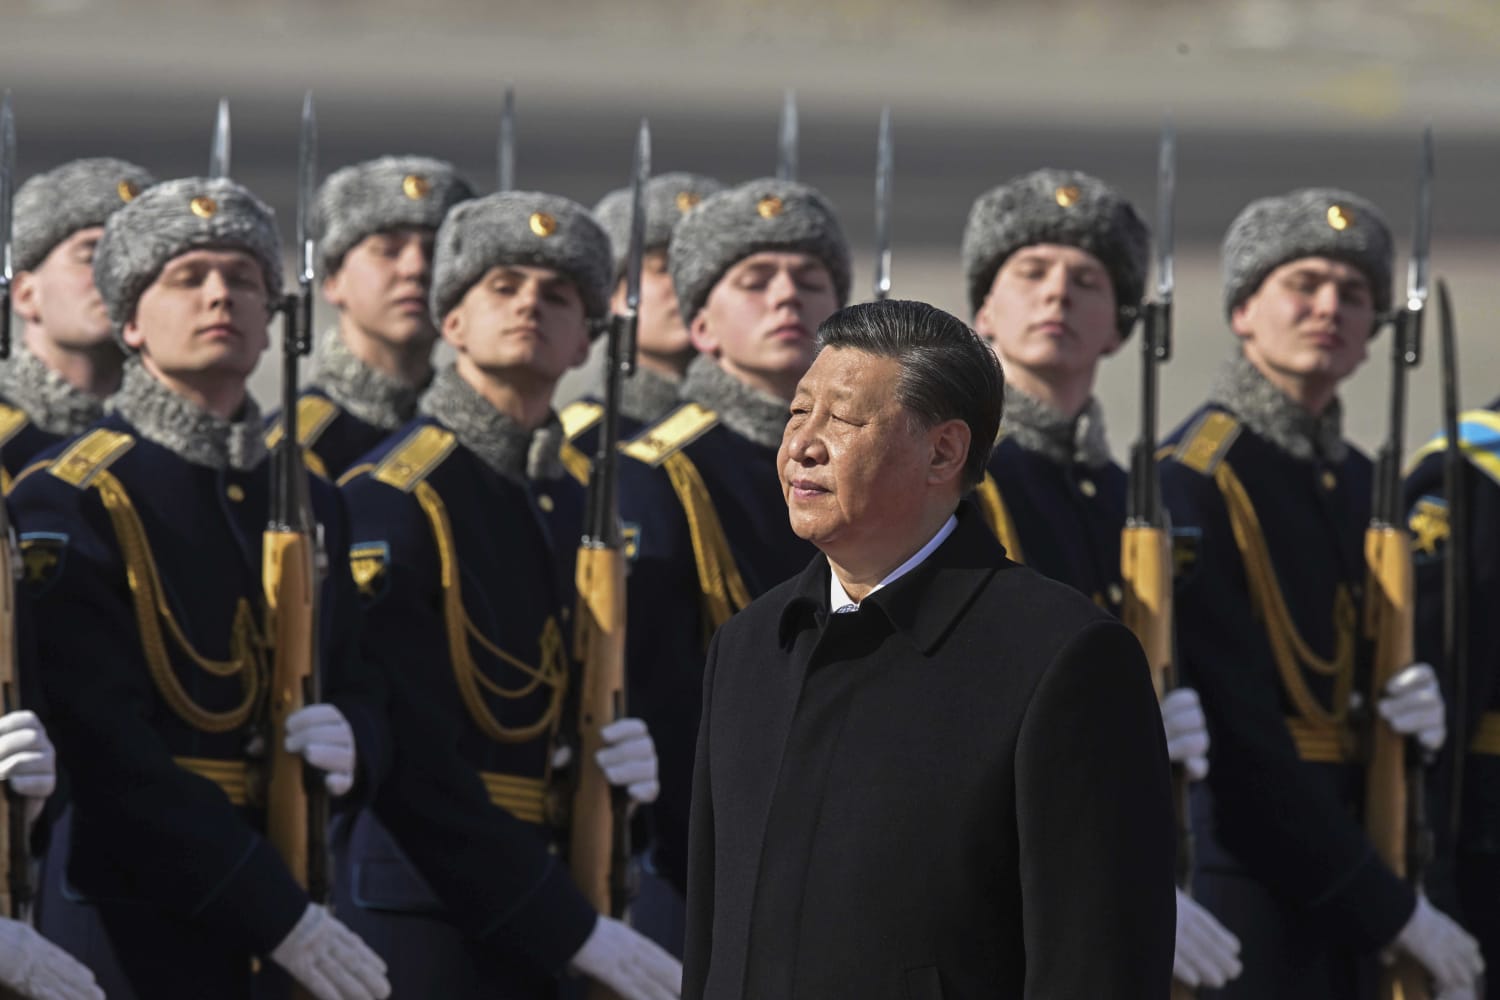 Xi promotes China as peacemaker on first trip to Russia since Ukraine invasion